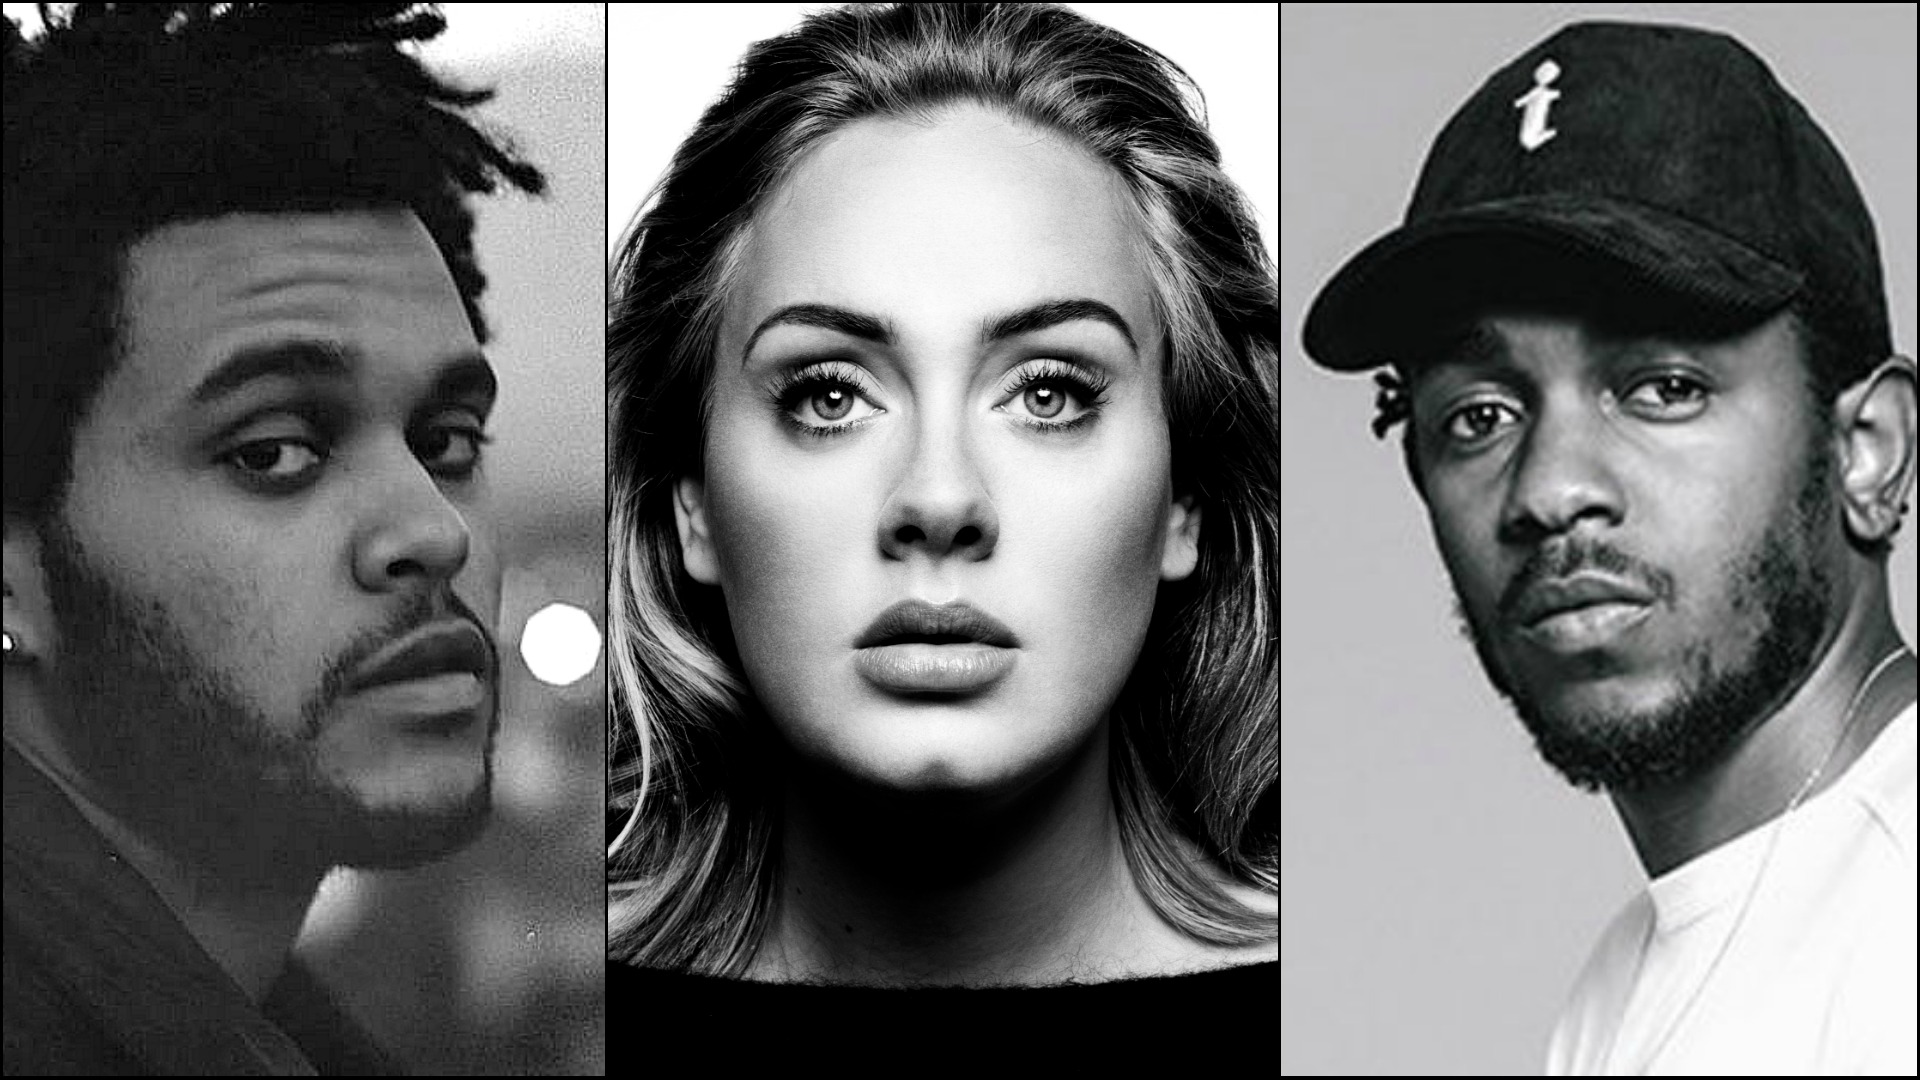 The Weeknd, Adele, And Kendrick Lamar To Perform At 2016 GRAMMY Awards1920 x 1080